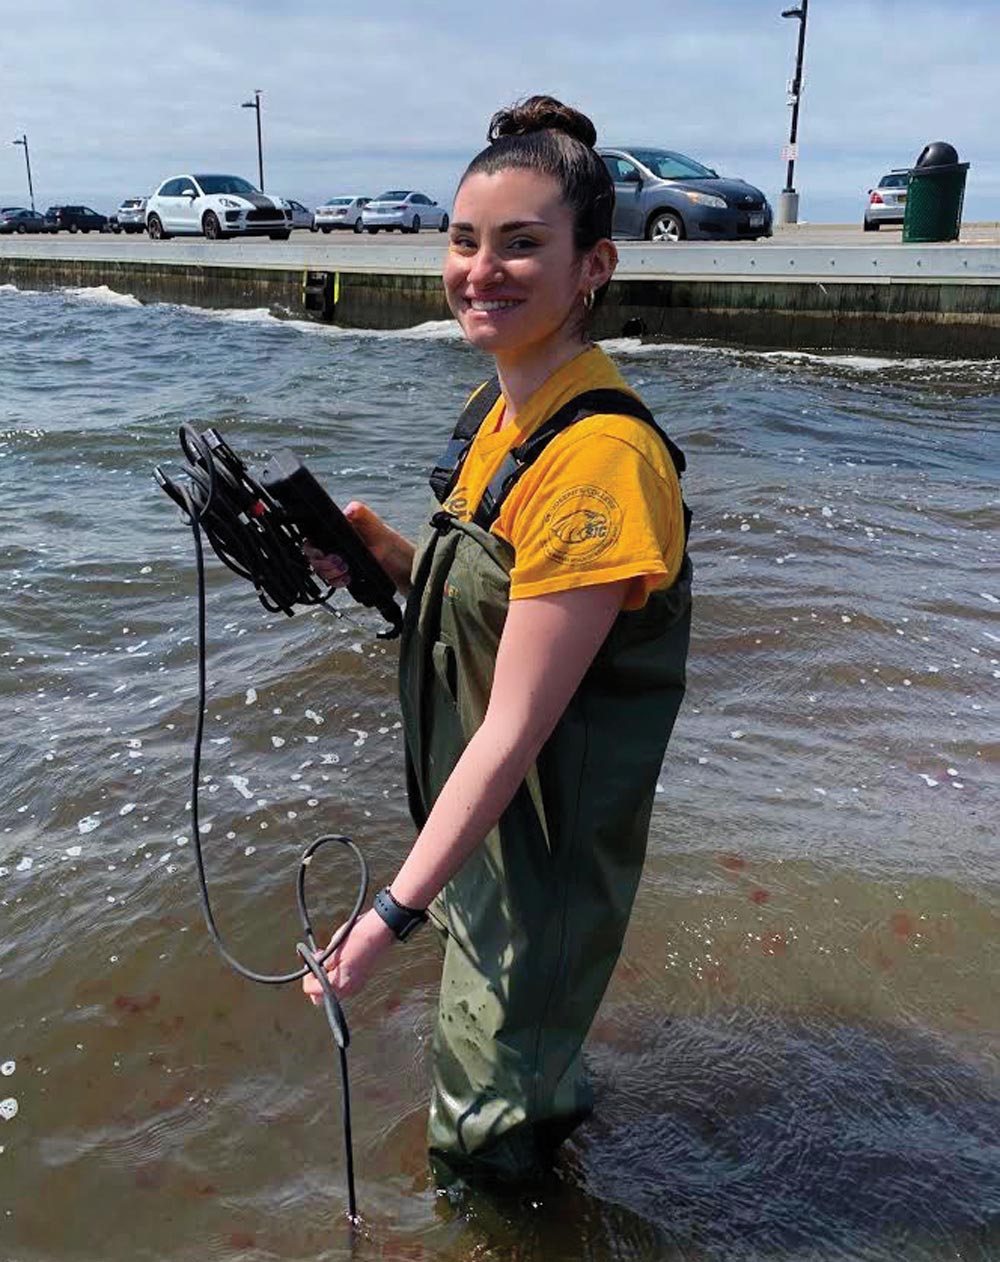 Student in water holding monitoring equipment